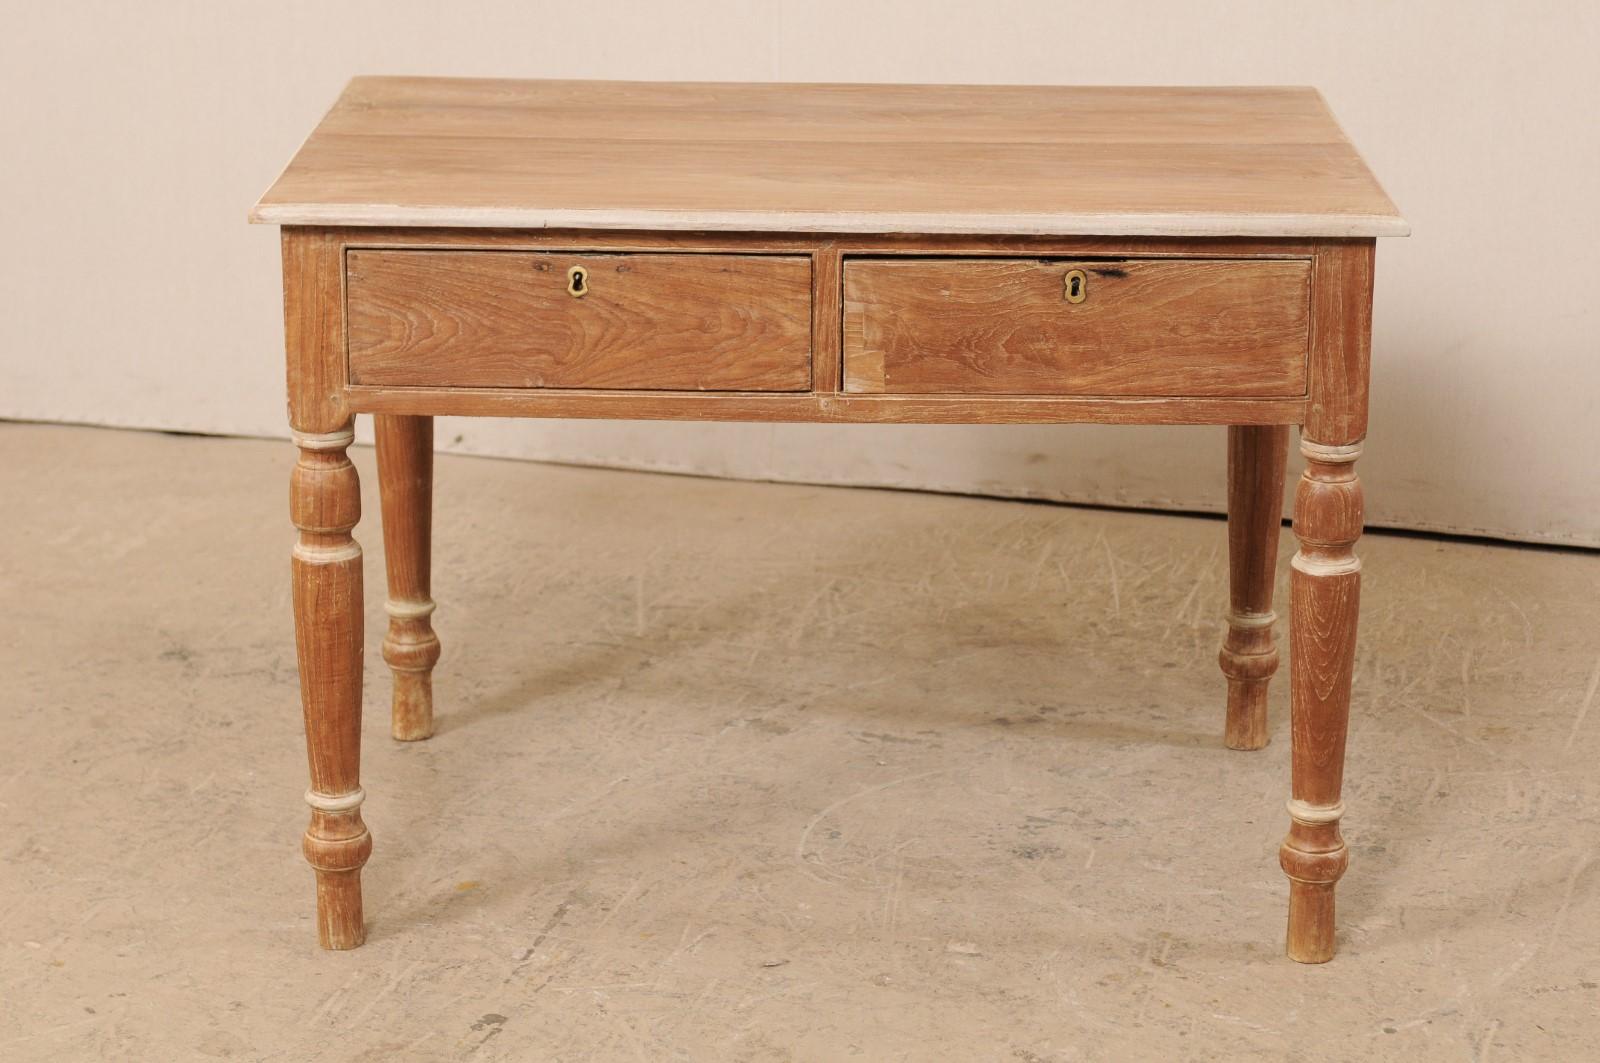 Indian Early 20th Century British Colonial Occasional Table with Drawers